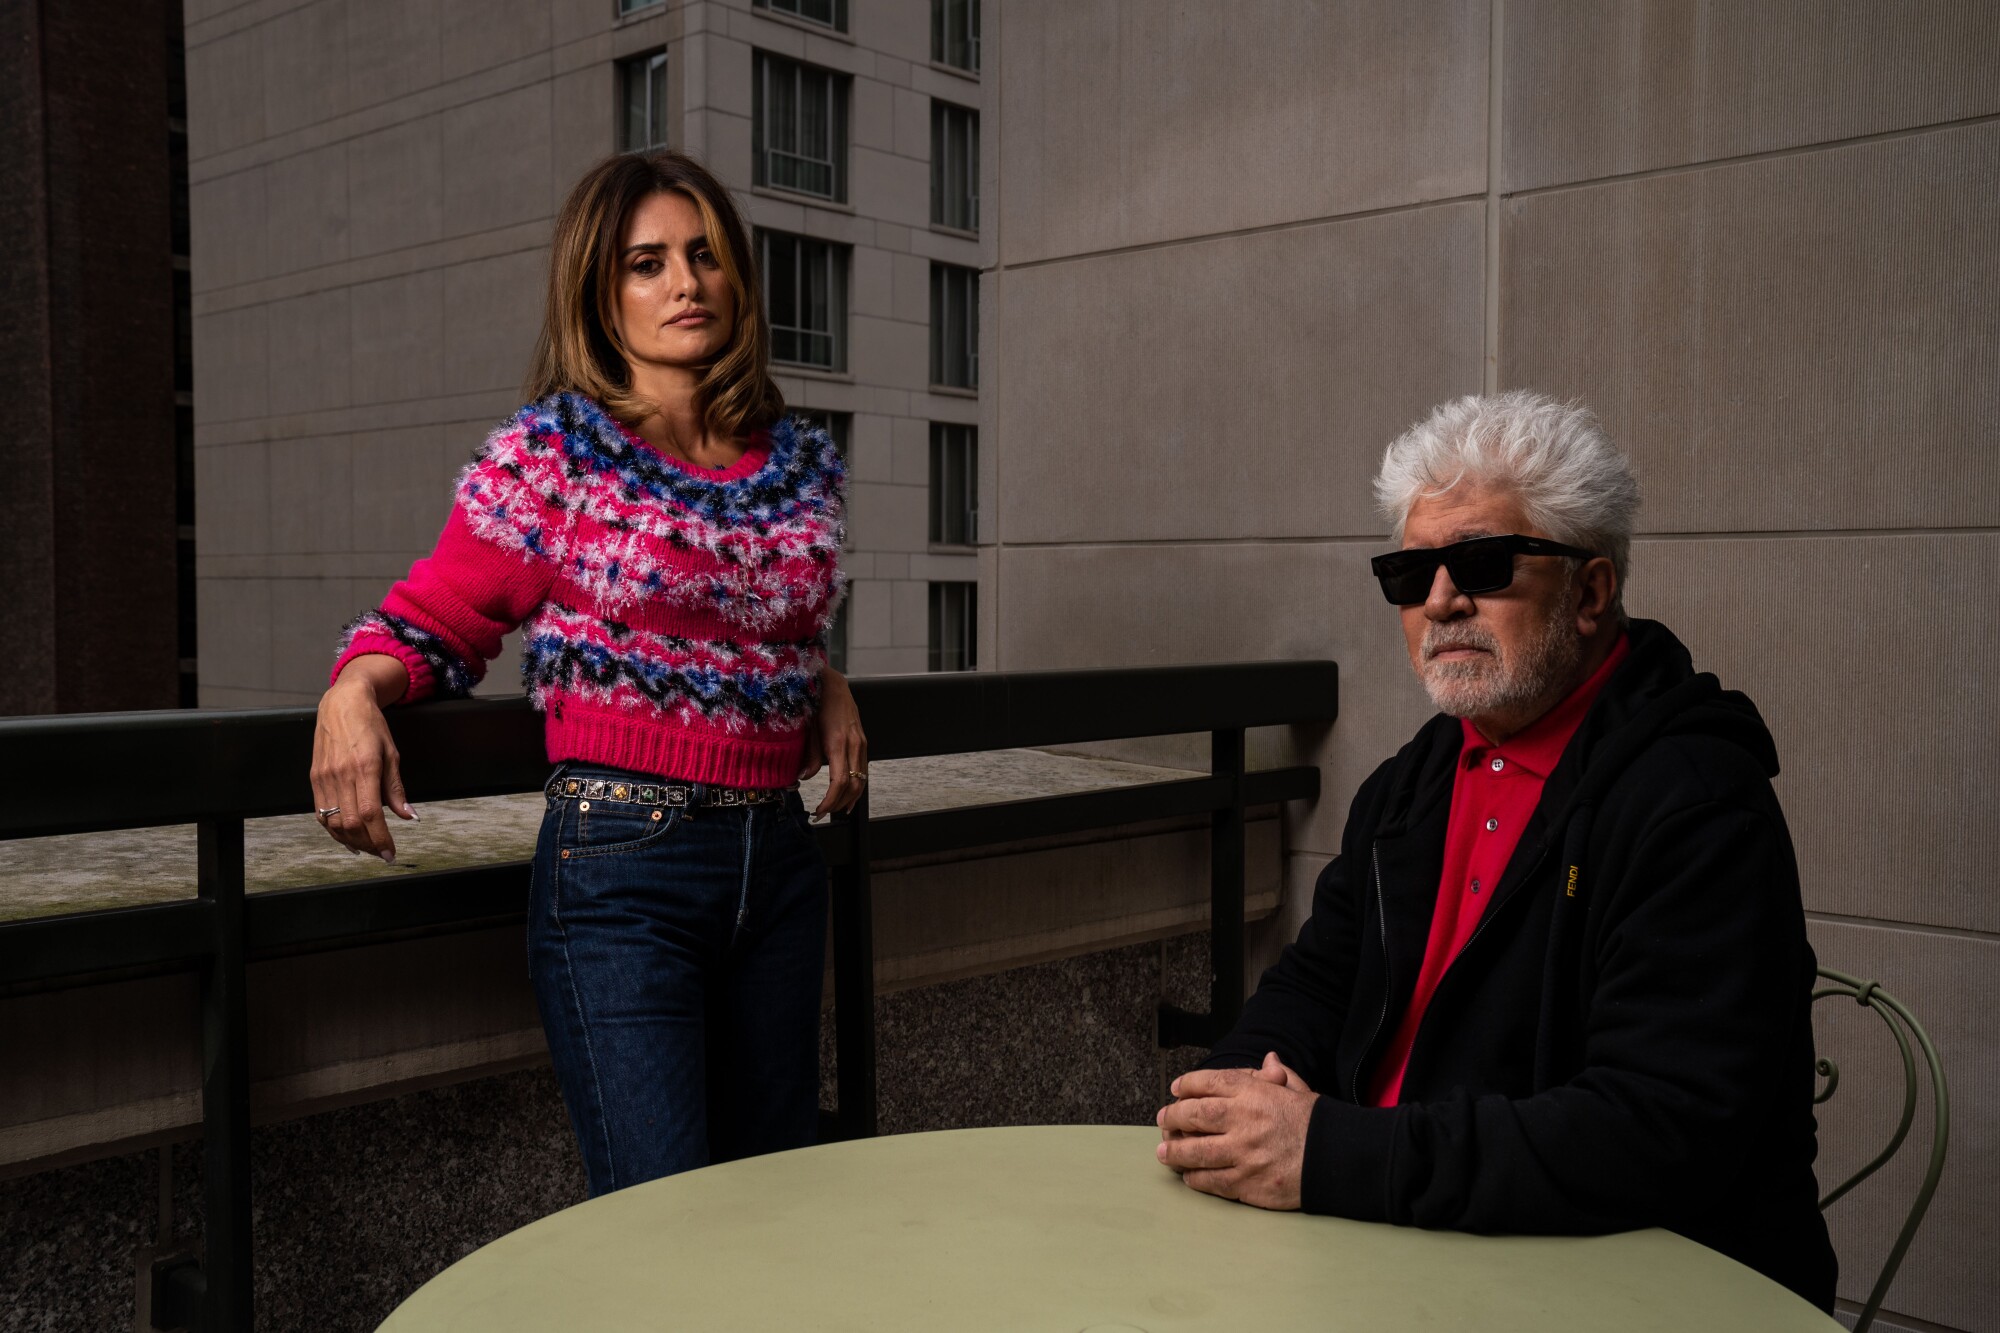 A woman in a red sweater leans against a railing while a man with white hair and sunglasses sits at a table outside 